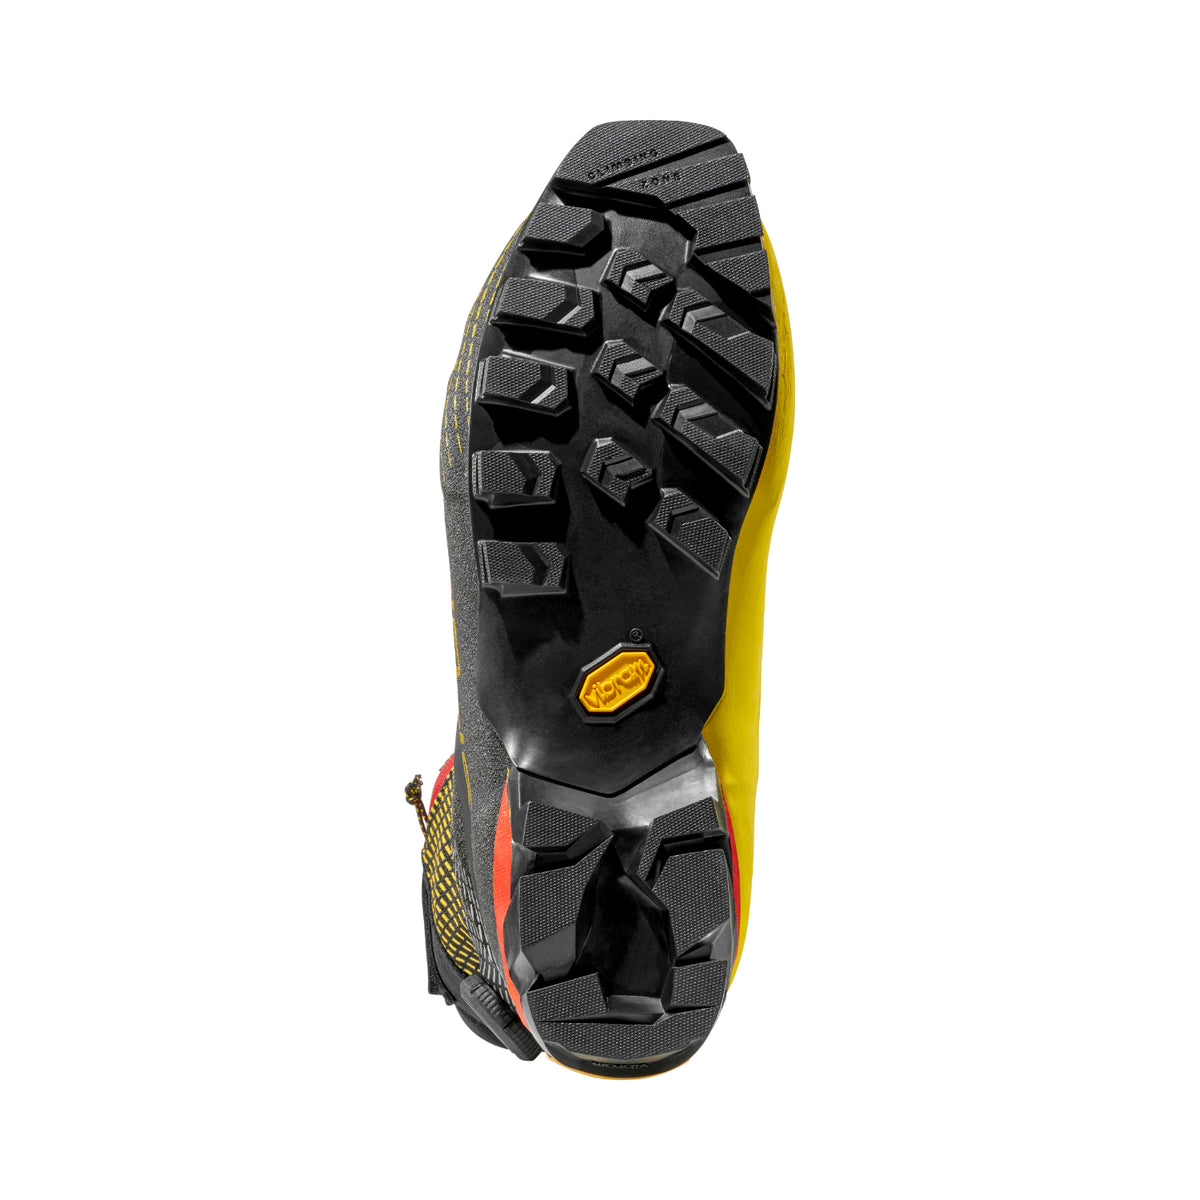 La Sportiva G-Summit mountaineering boots in black yellow and red, showing sole unit